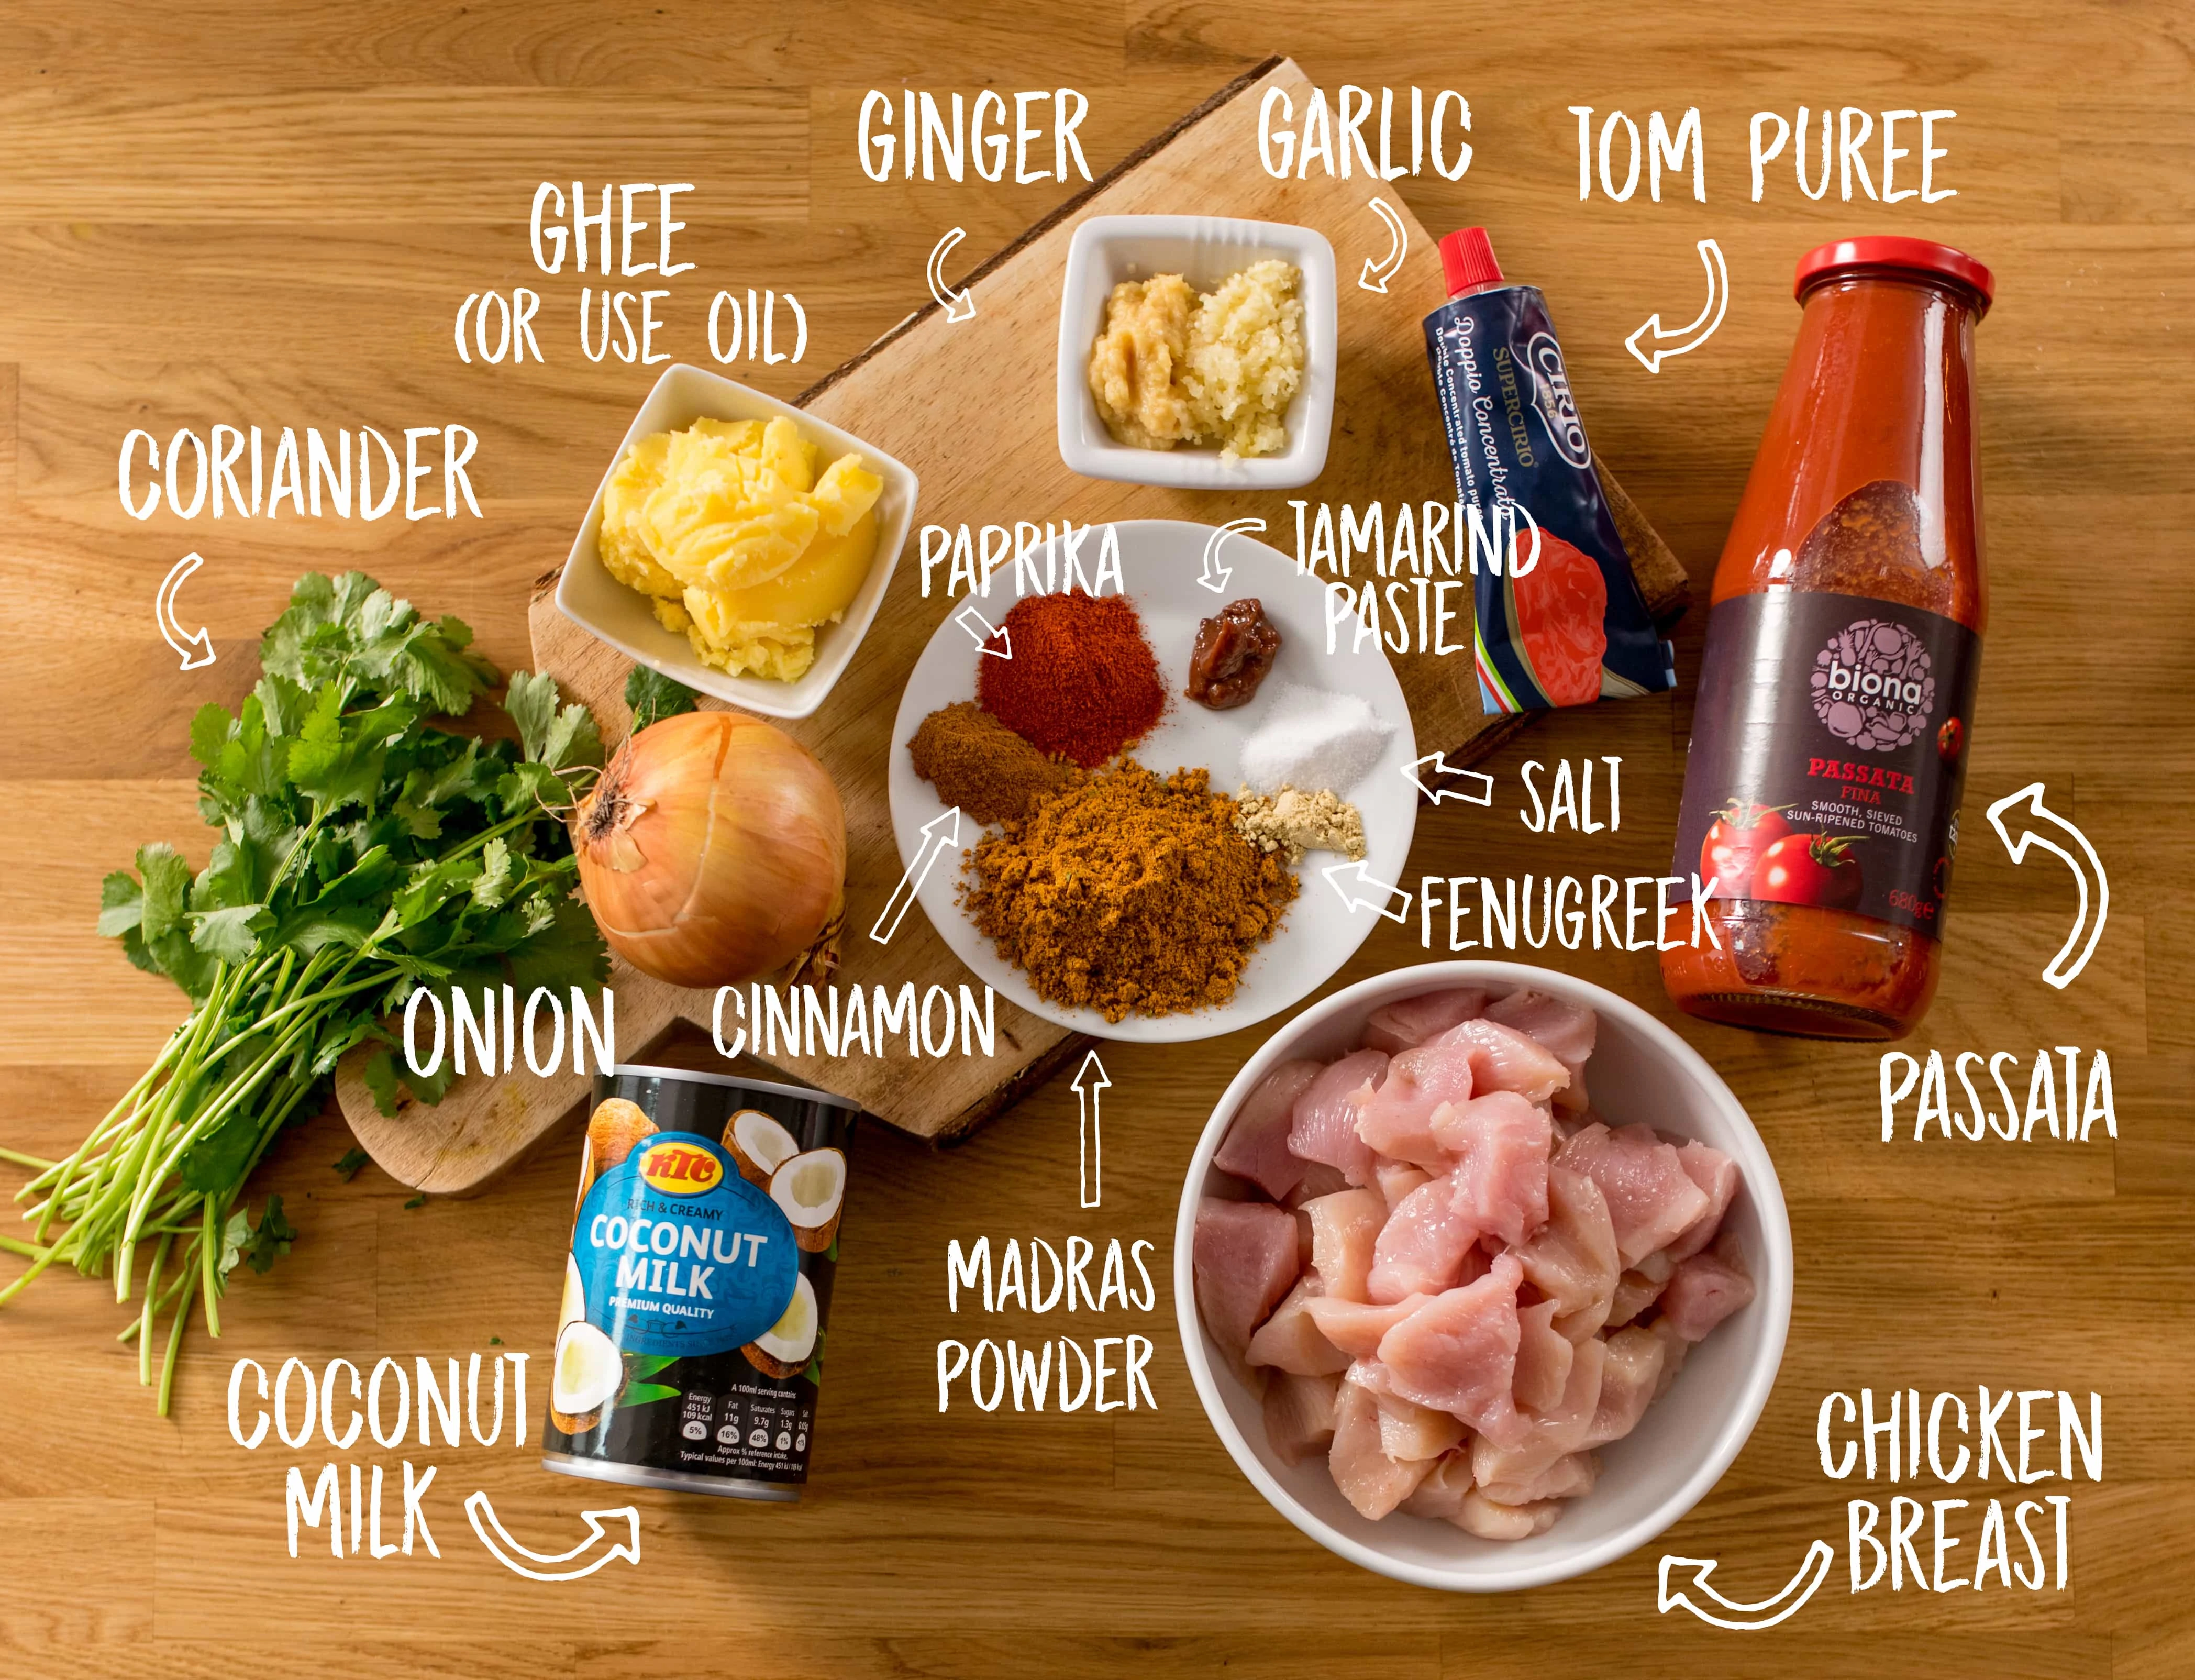 Ingredients for Chicken Madras on a wooden table